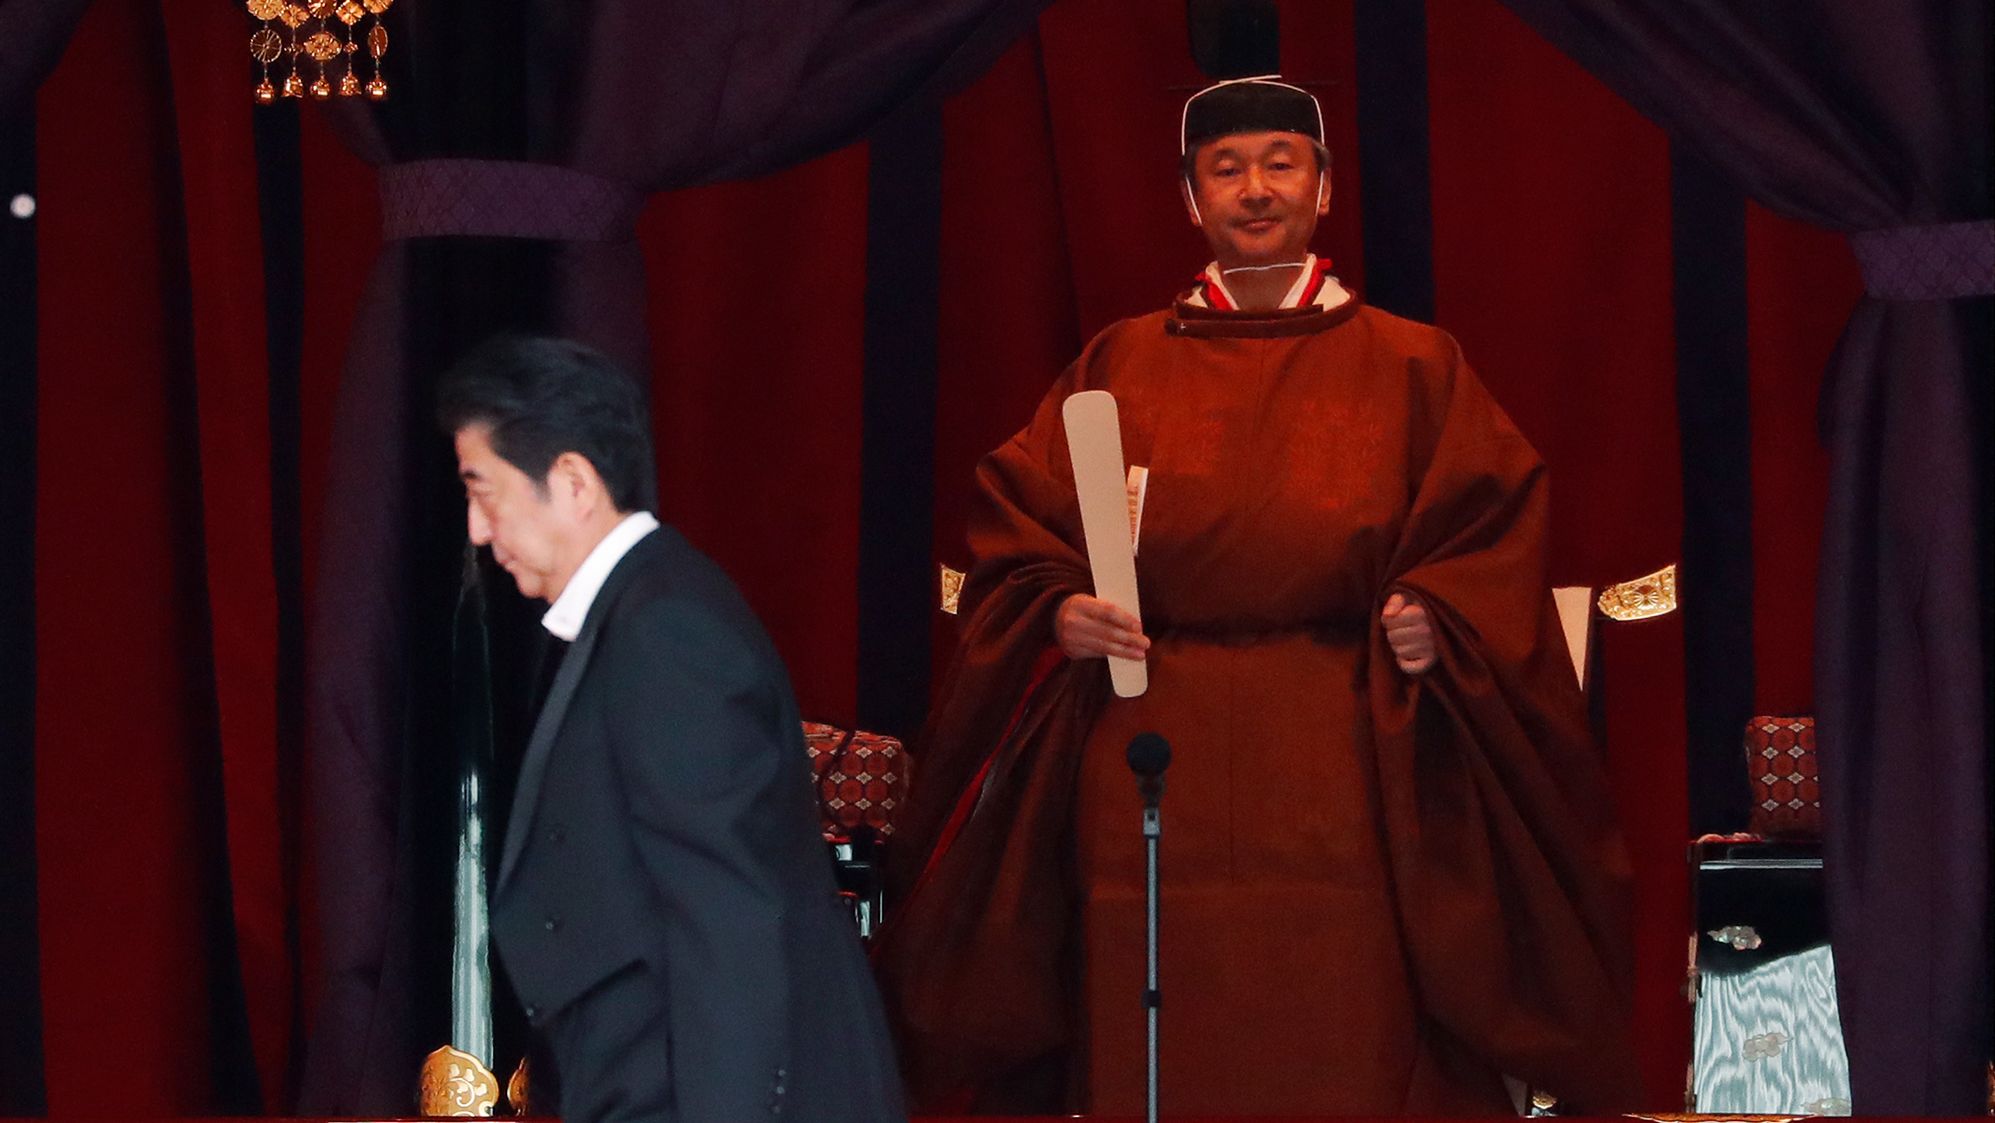 Japan's Prime Minister Shinzo Abe walks past Emperor Naruhito during his enthronement ceremony.